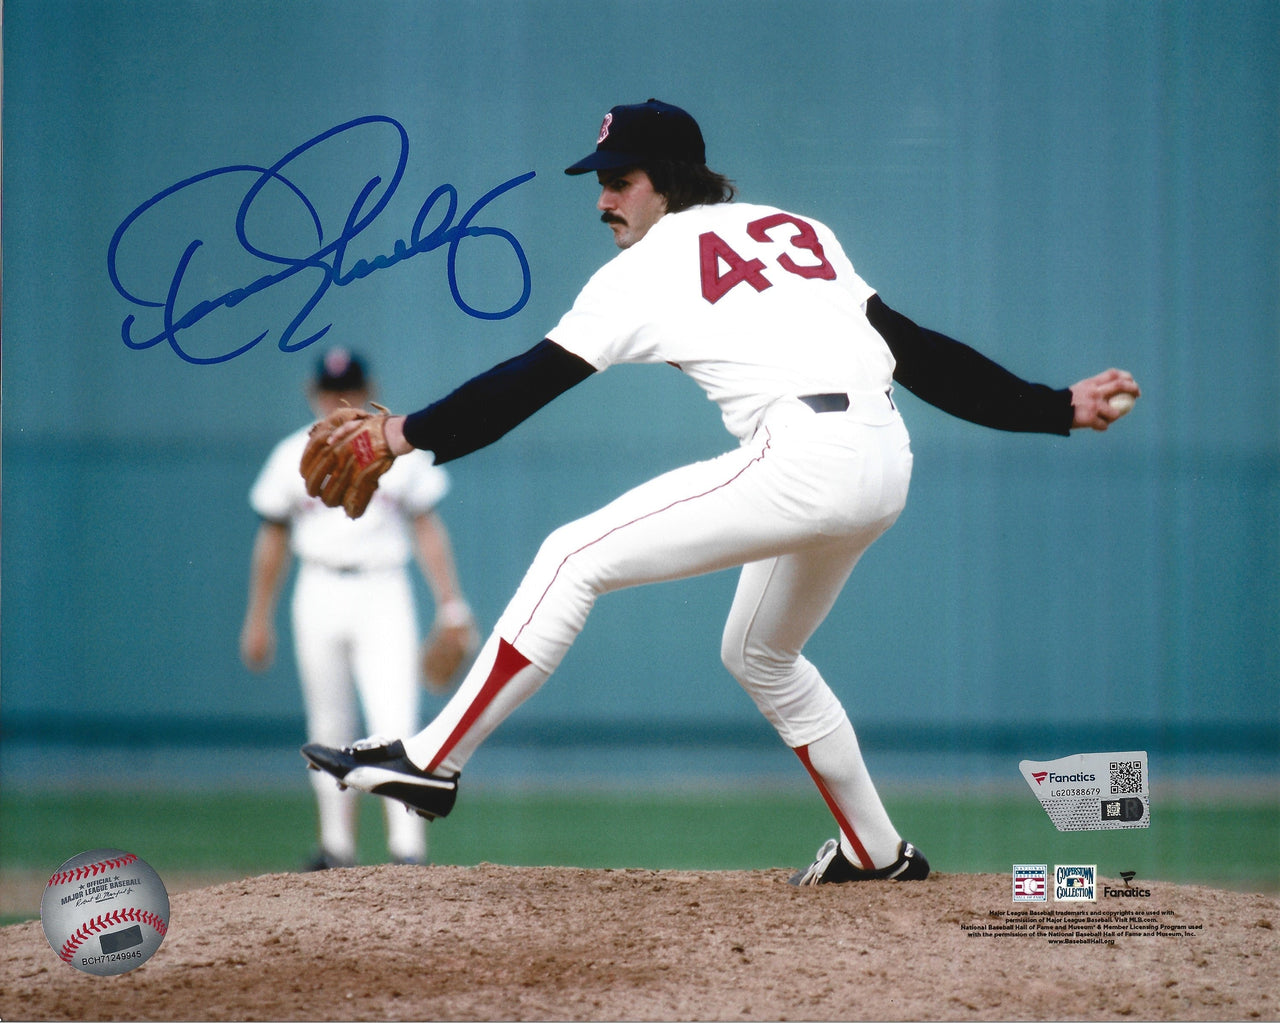 Dennis Eckersley in Action Boston Red Sox Autographed 16" x 20" Baseball Photo - Dynasty Sports & Framing 